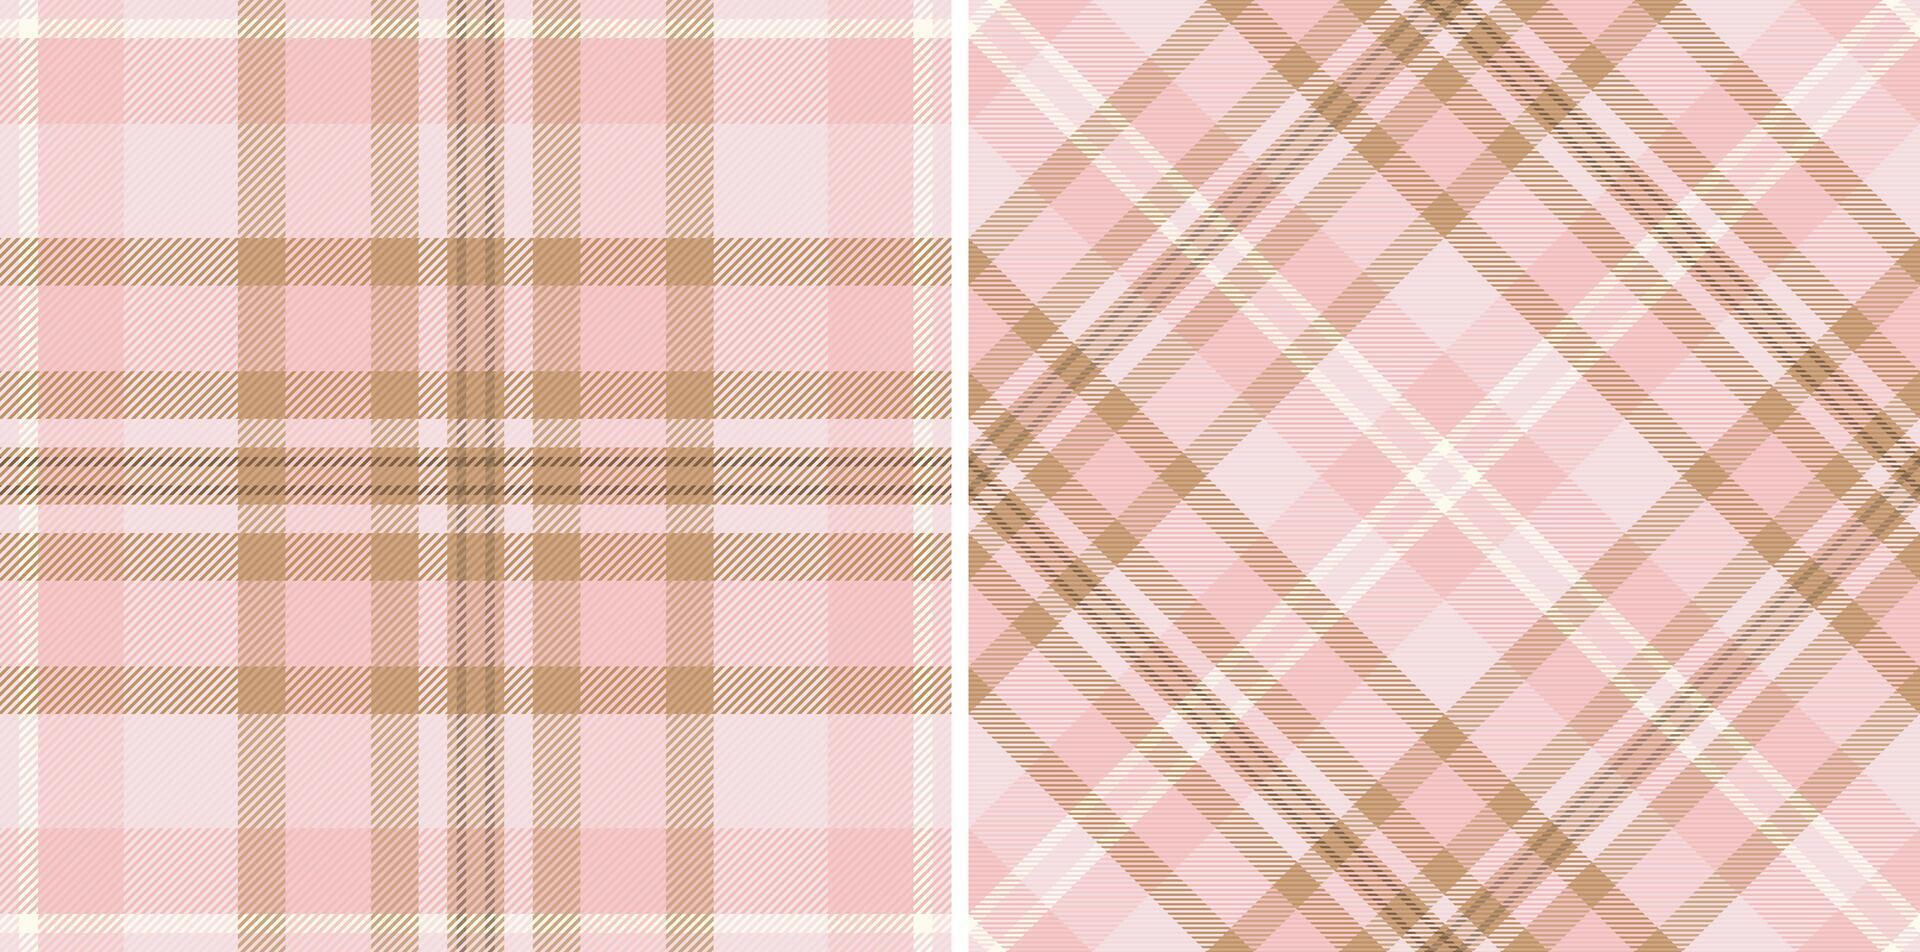 Fabric pattern texture of background vector tartan with a textile seamless check plaid. Set in stylish colors. Elegant tablecloths for special occasions.